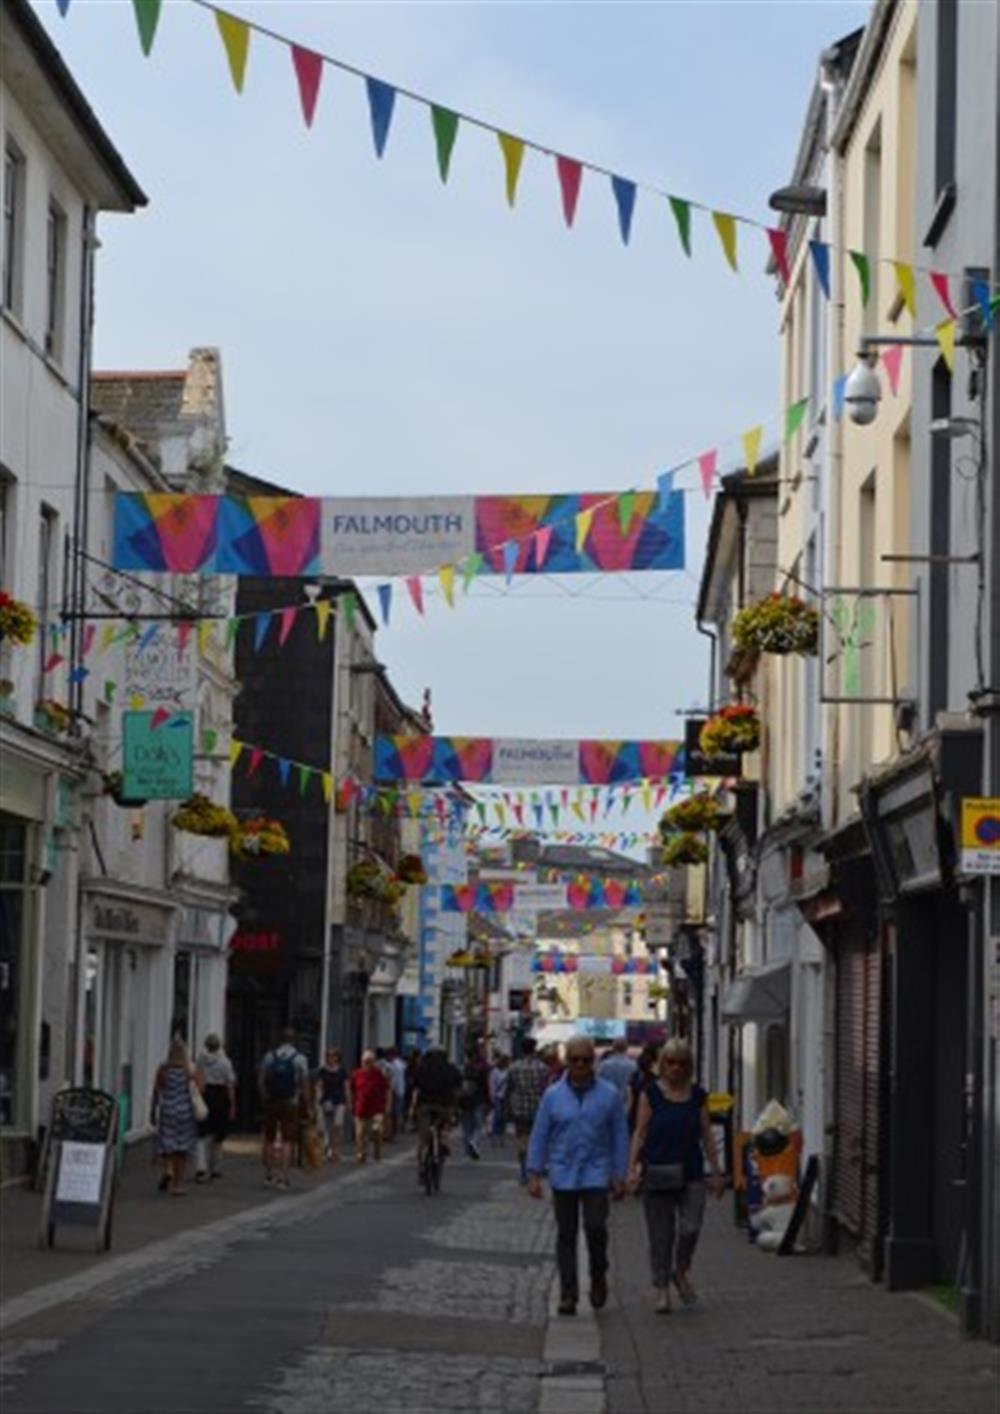 Falmouth town has an array of shops, plus a range of restaurants, cafes and art galleries at La Mouette in Falmouth